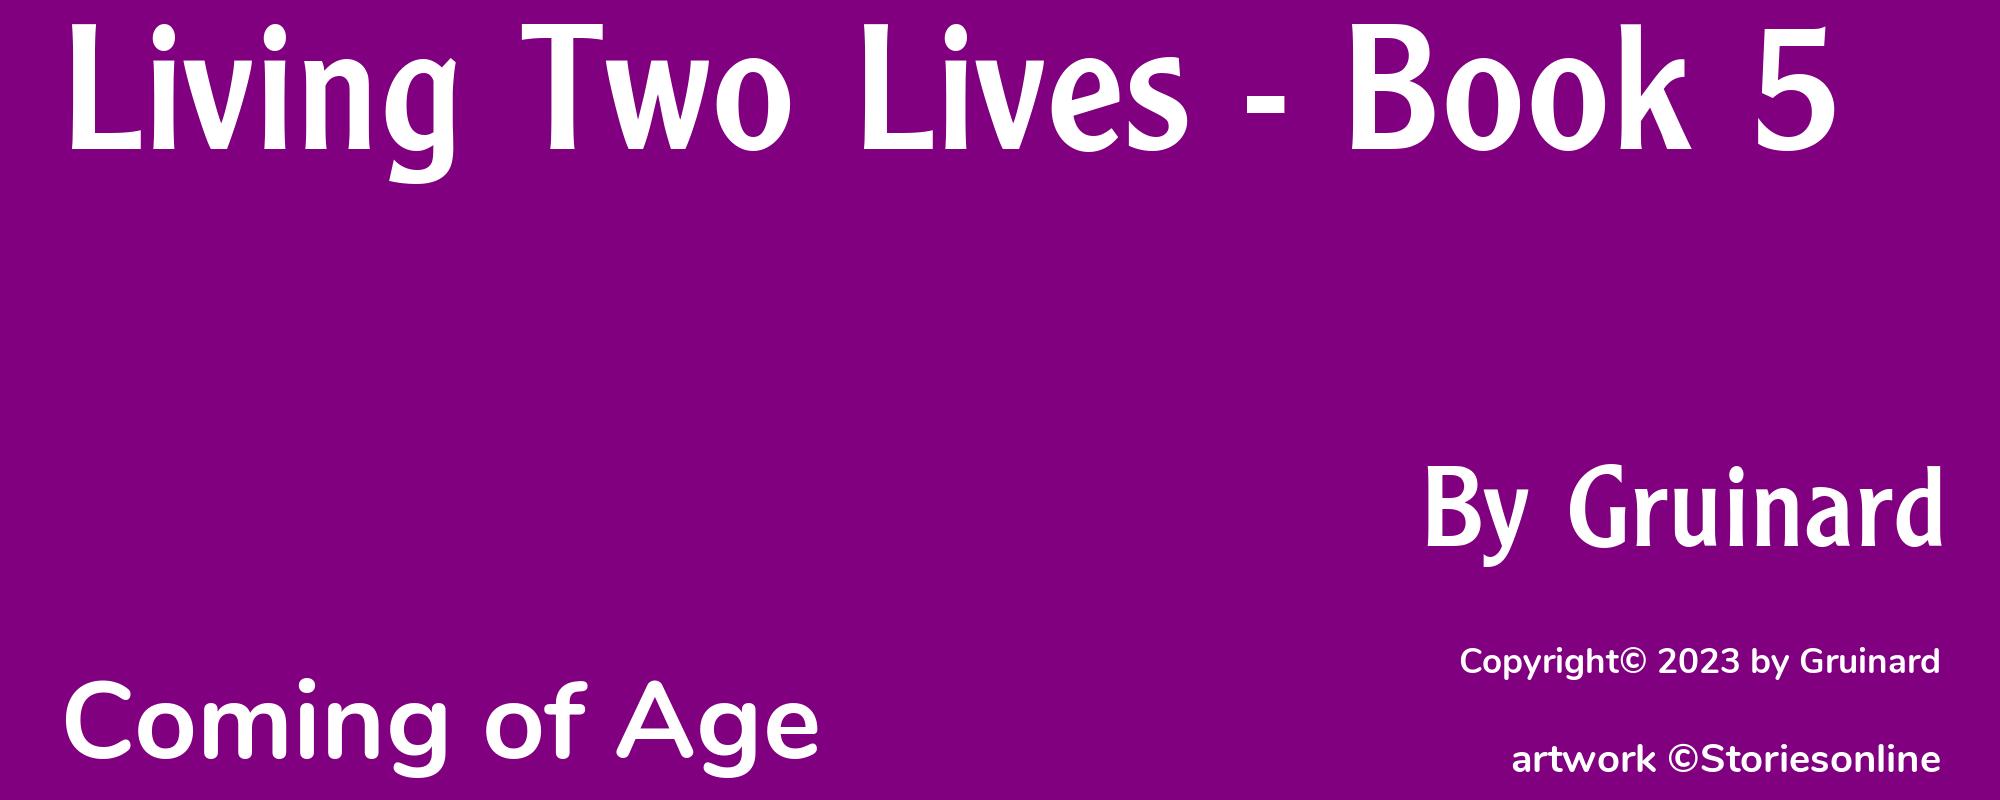 Living Two Lives - Book 5 - Cover